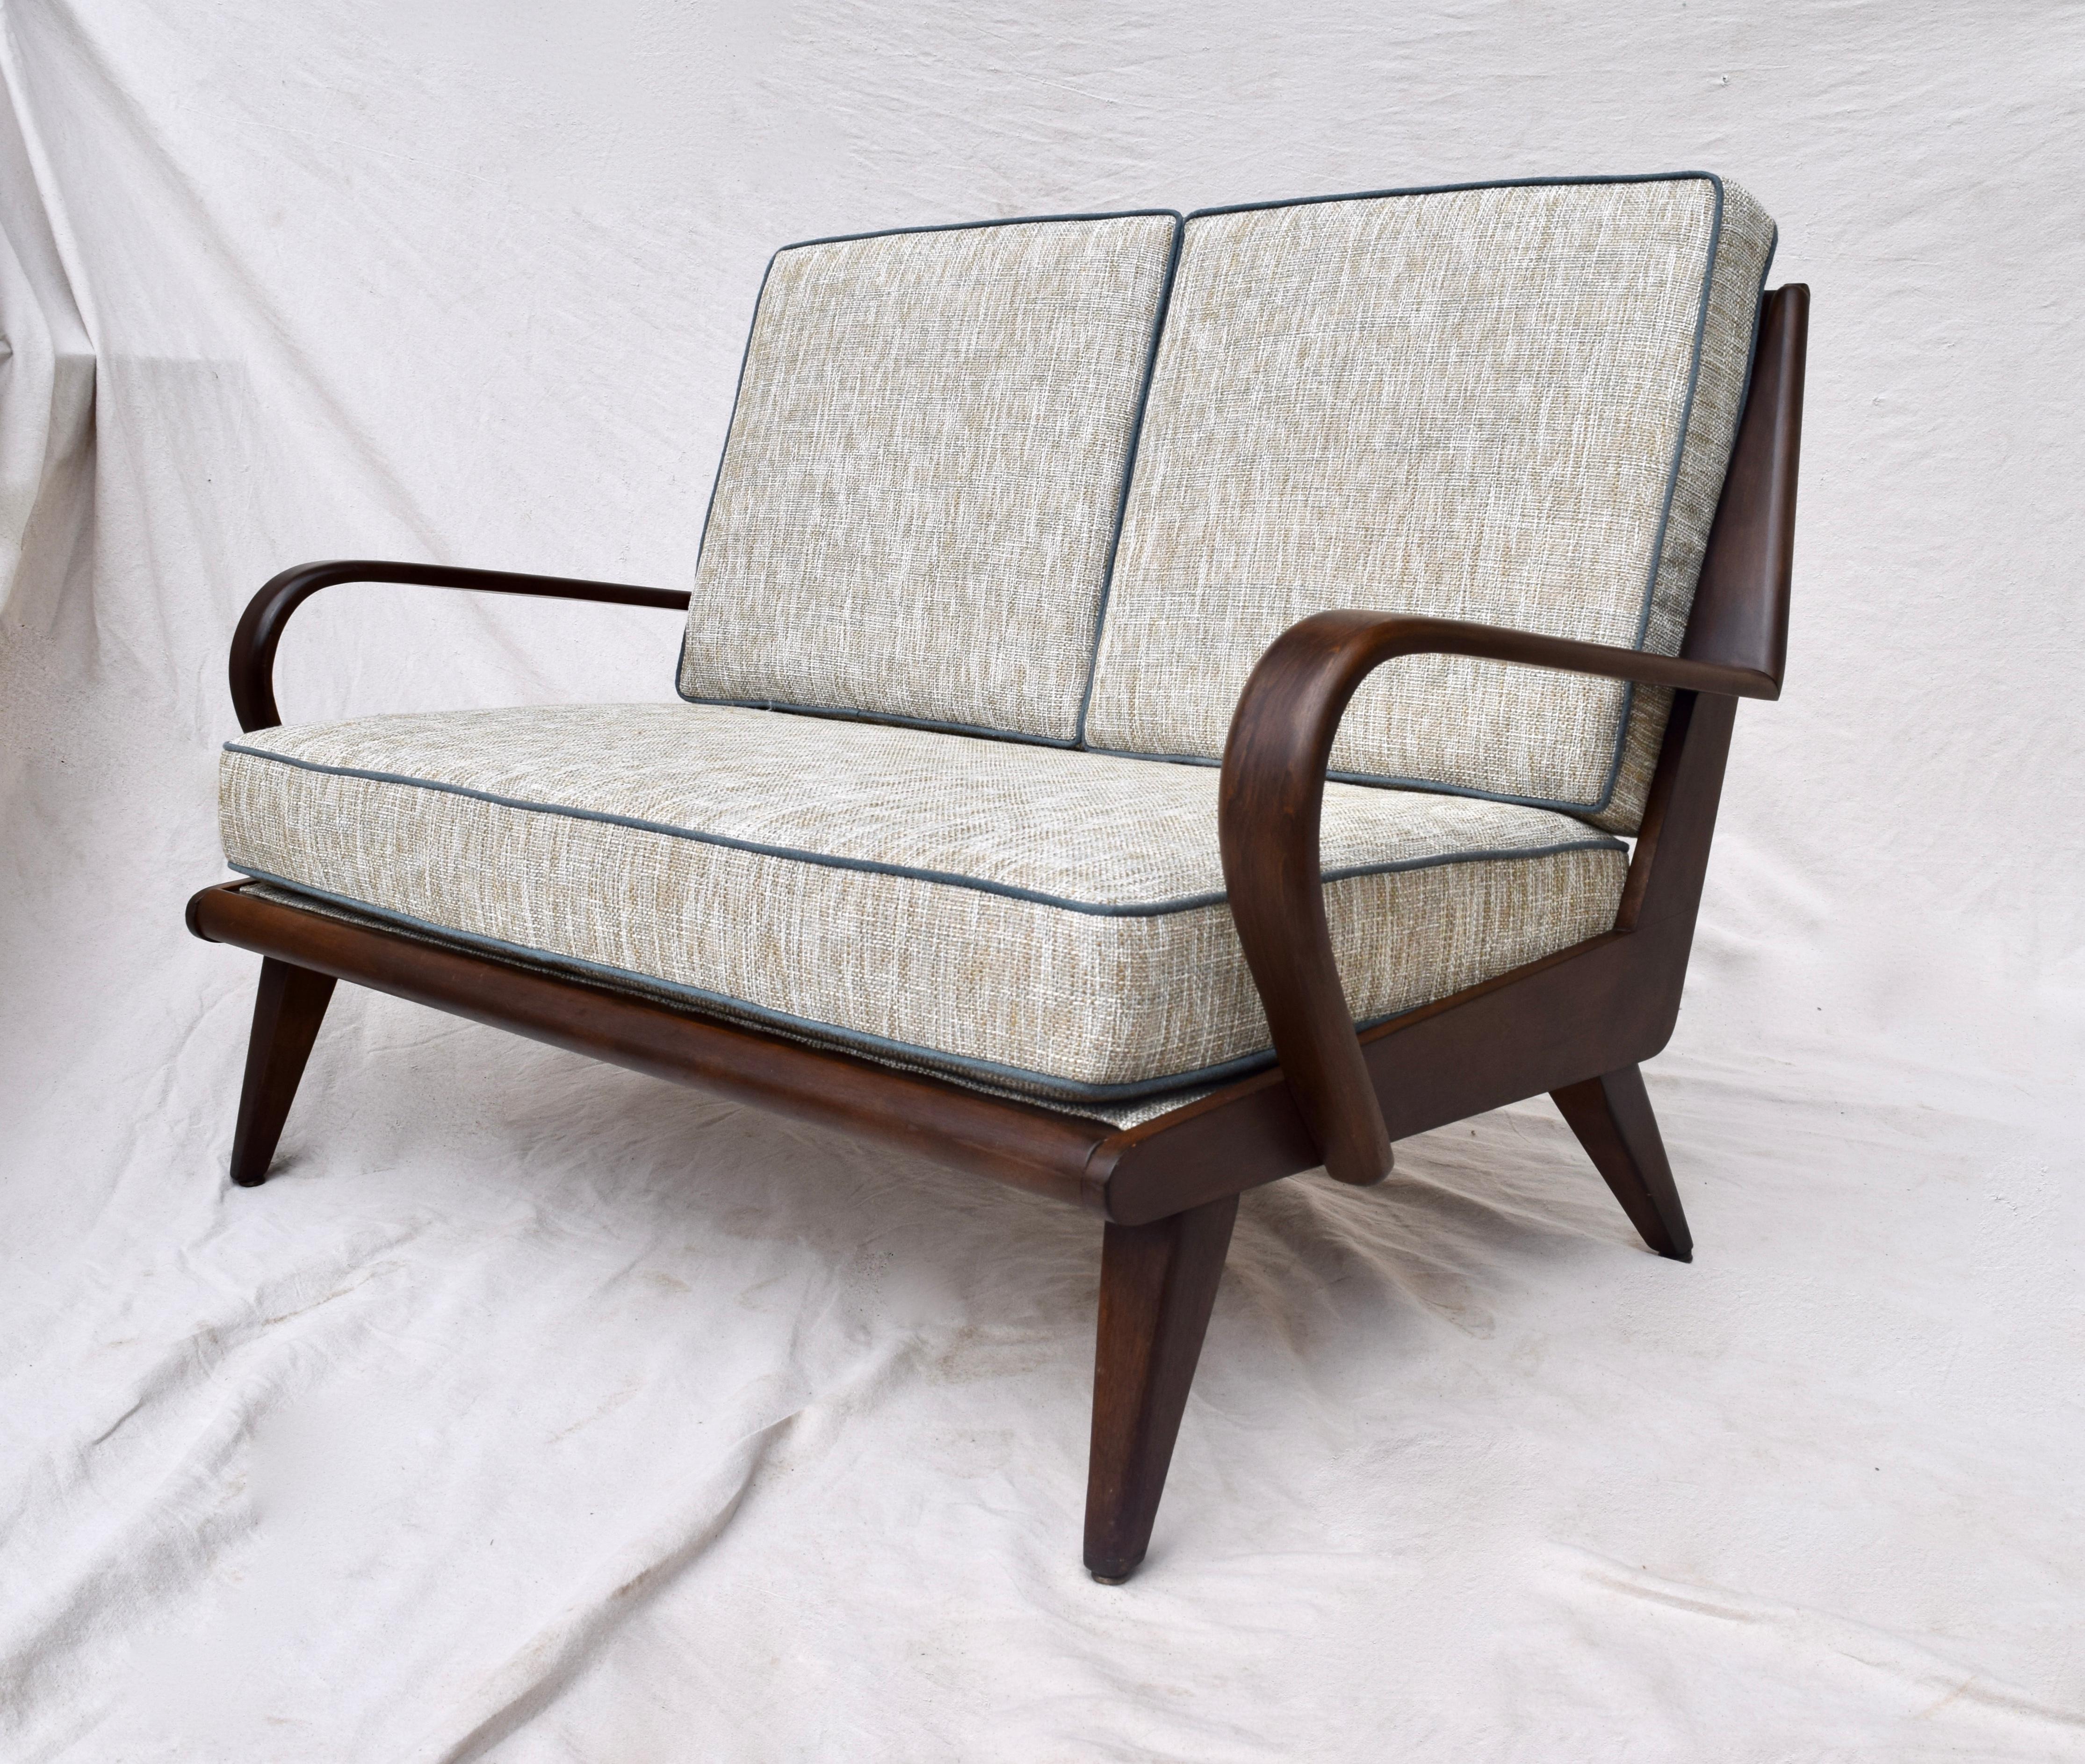 Heywood Wakefield 1950s Aristocrat series loveseat sofa. Fully restored and modified to a rich walnut finish revealing marvelous wood grains evident in the Danish modern influenced frame and bent wood arms. Features new custom cushions upholstered